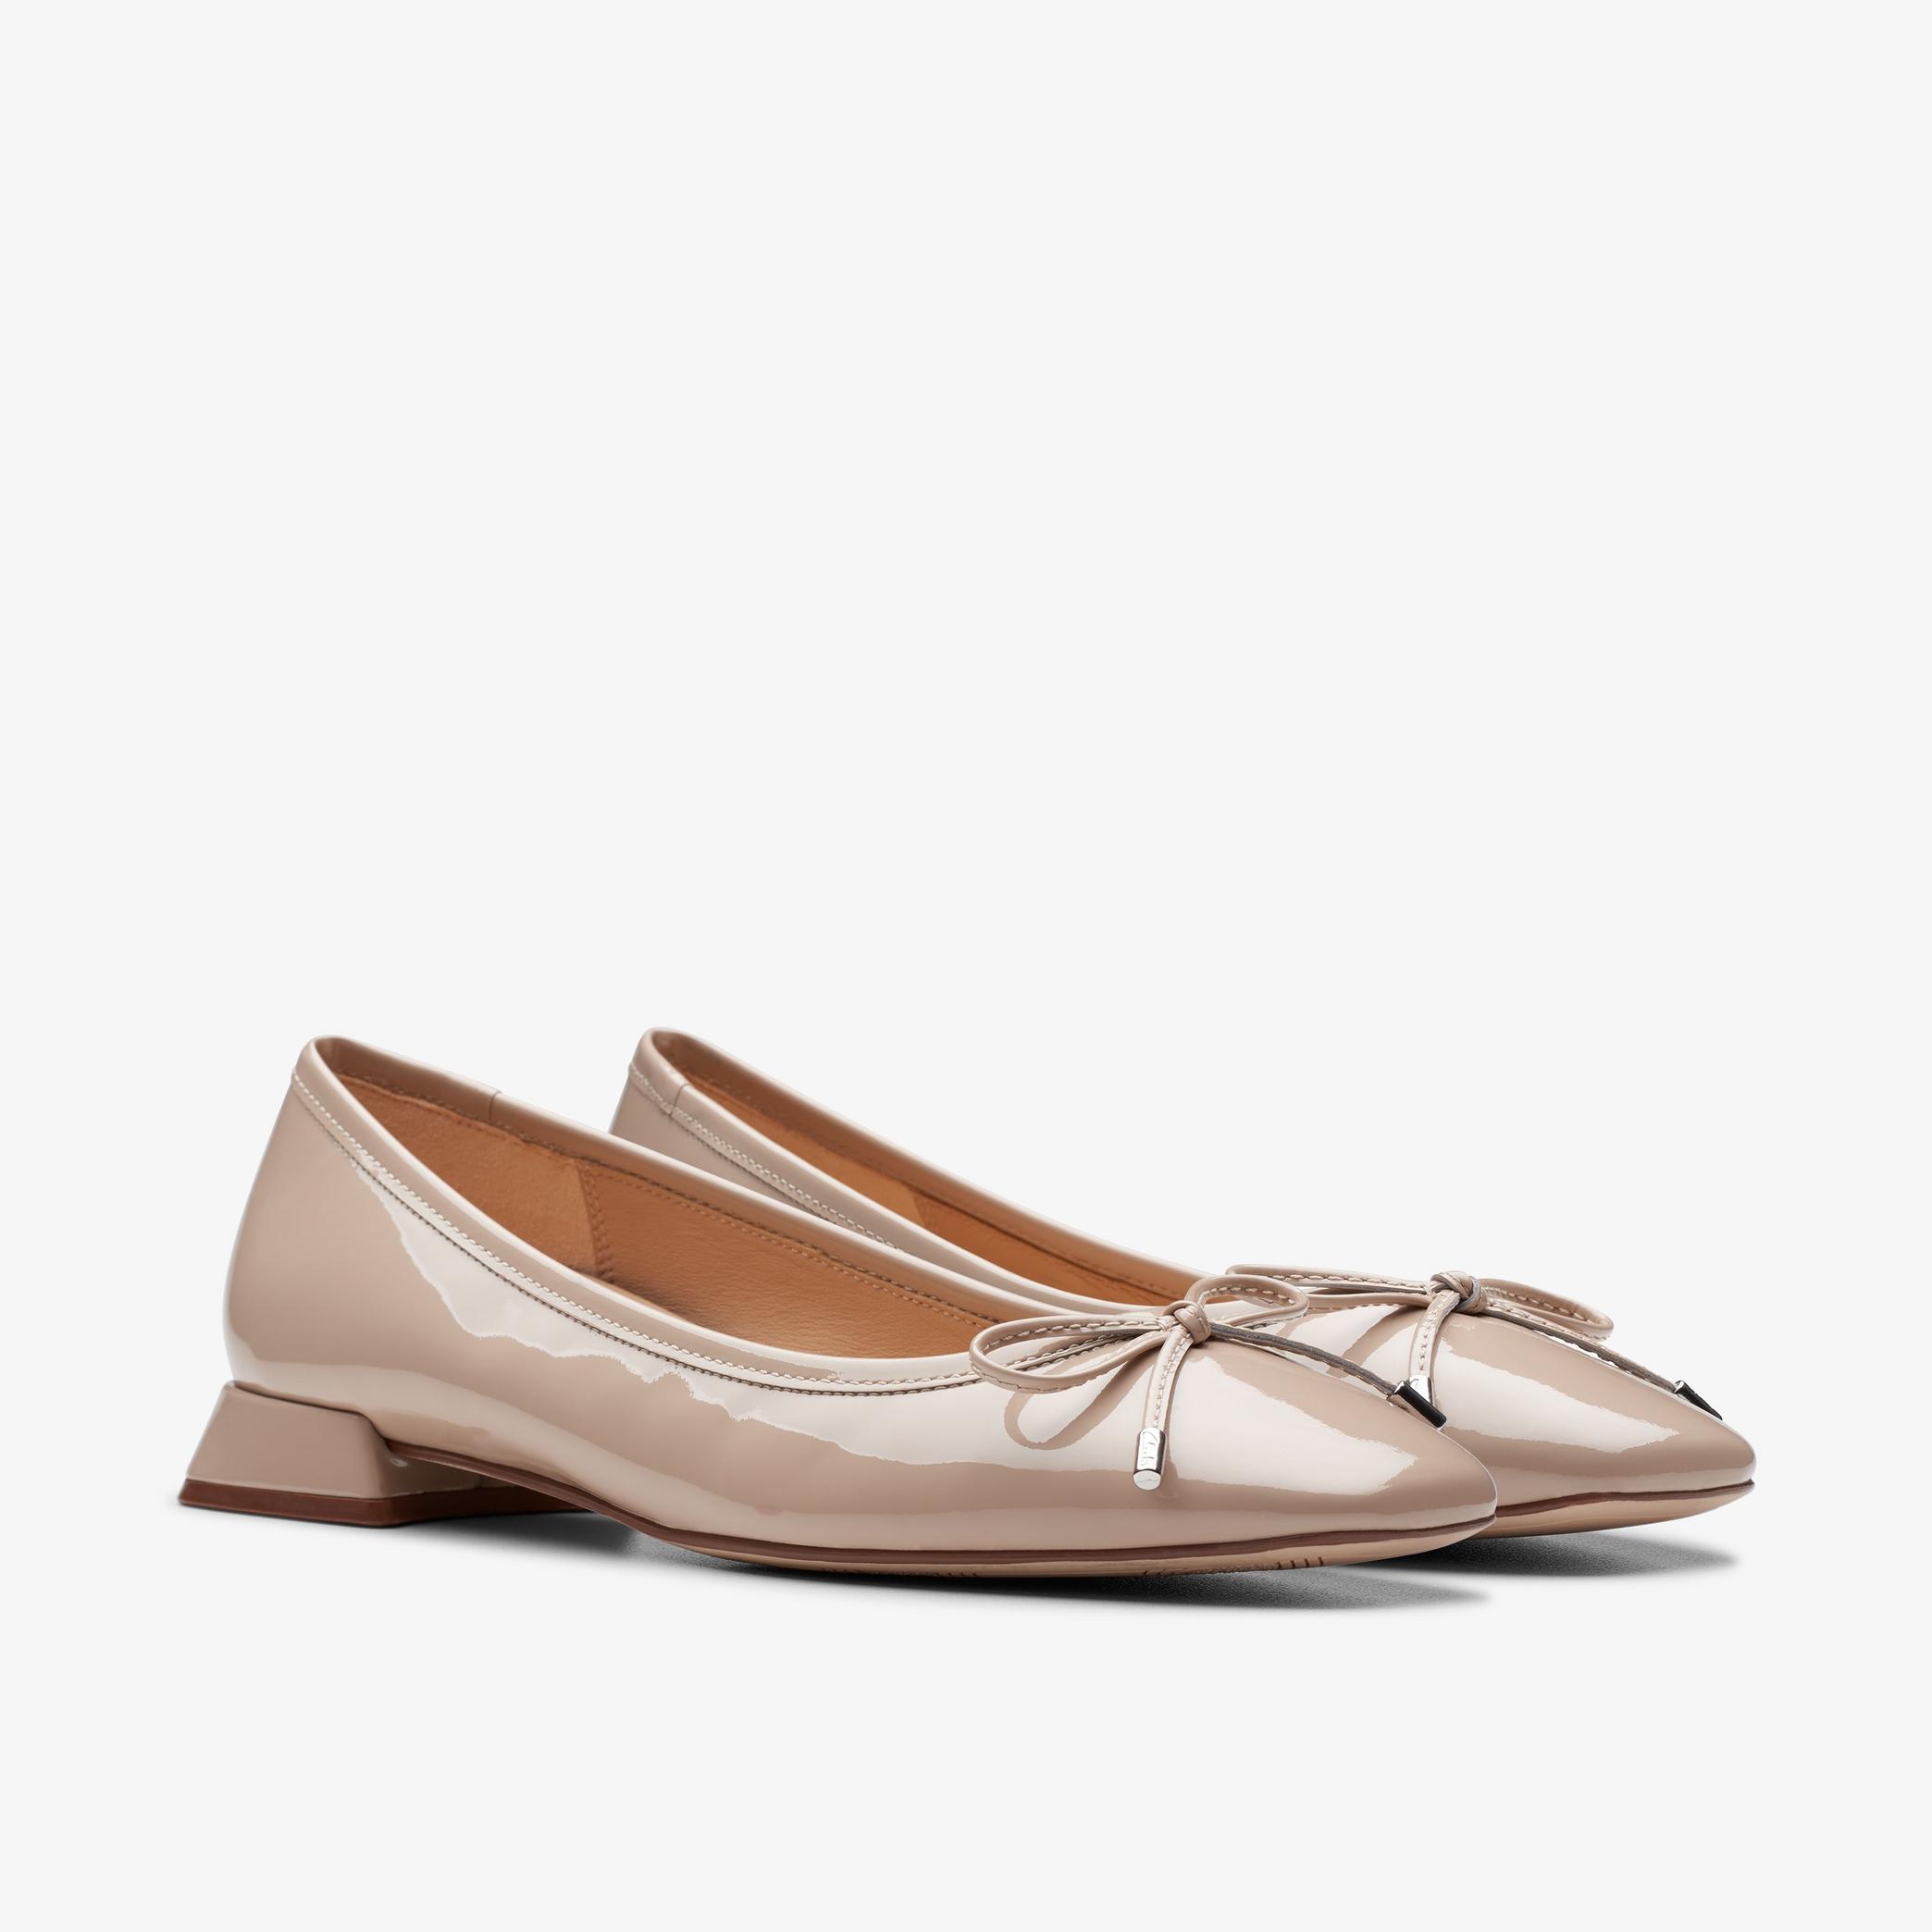 Ubree 15 Step Sand Patent Ballerina Shoes, view 8 of 11